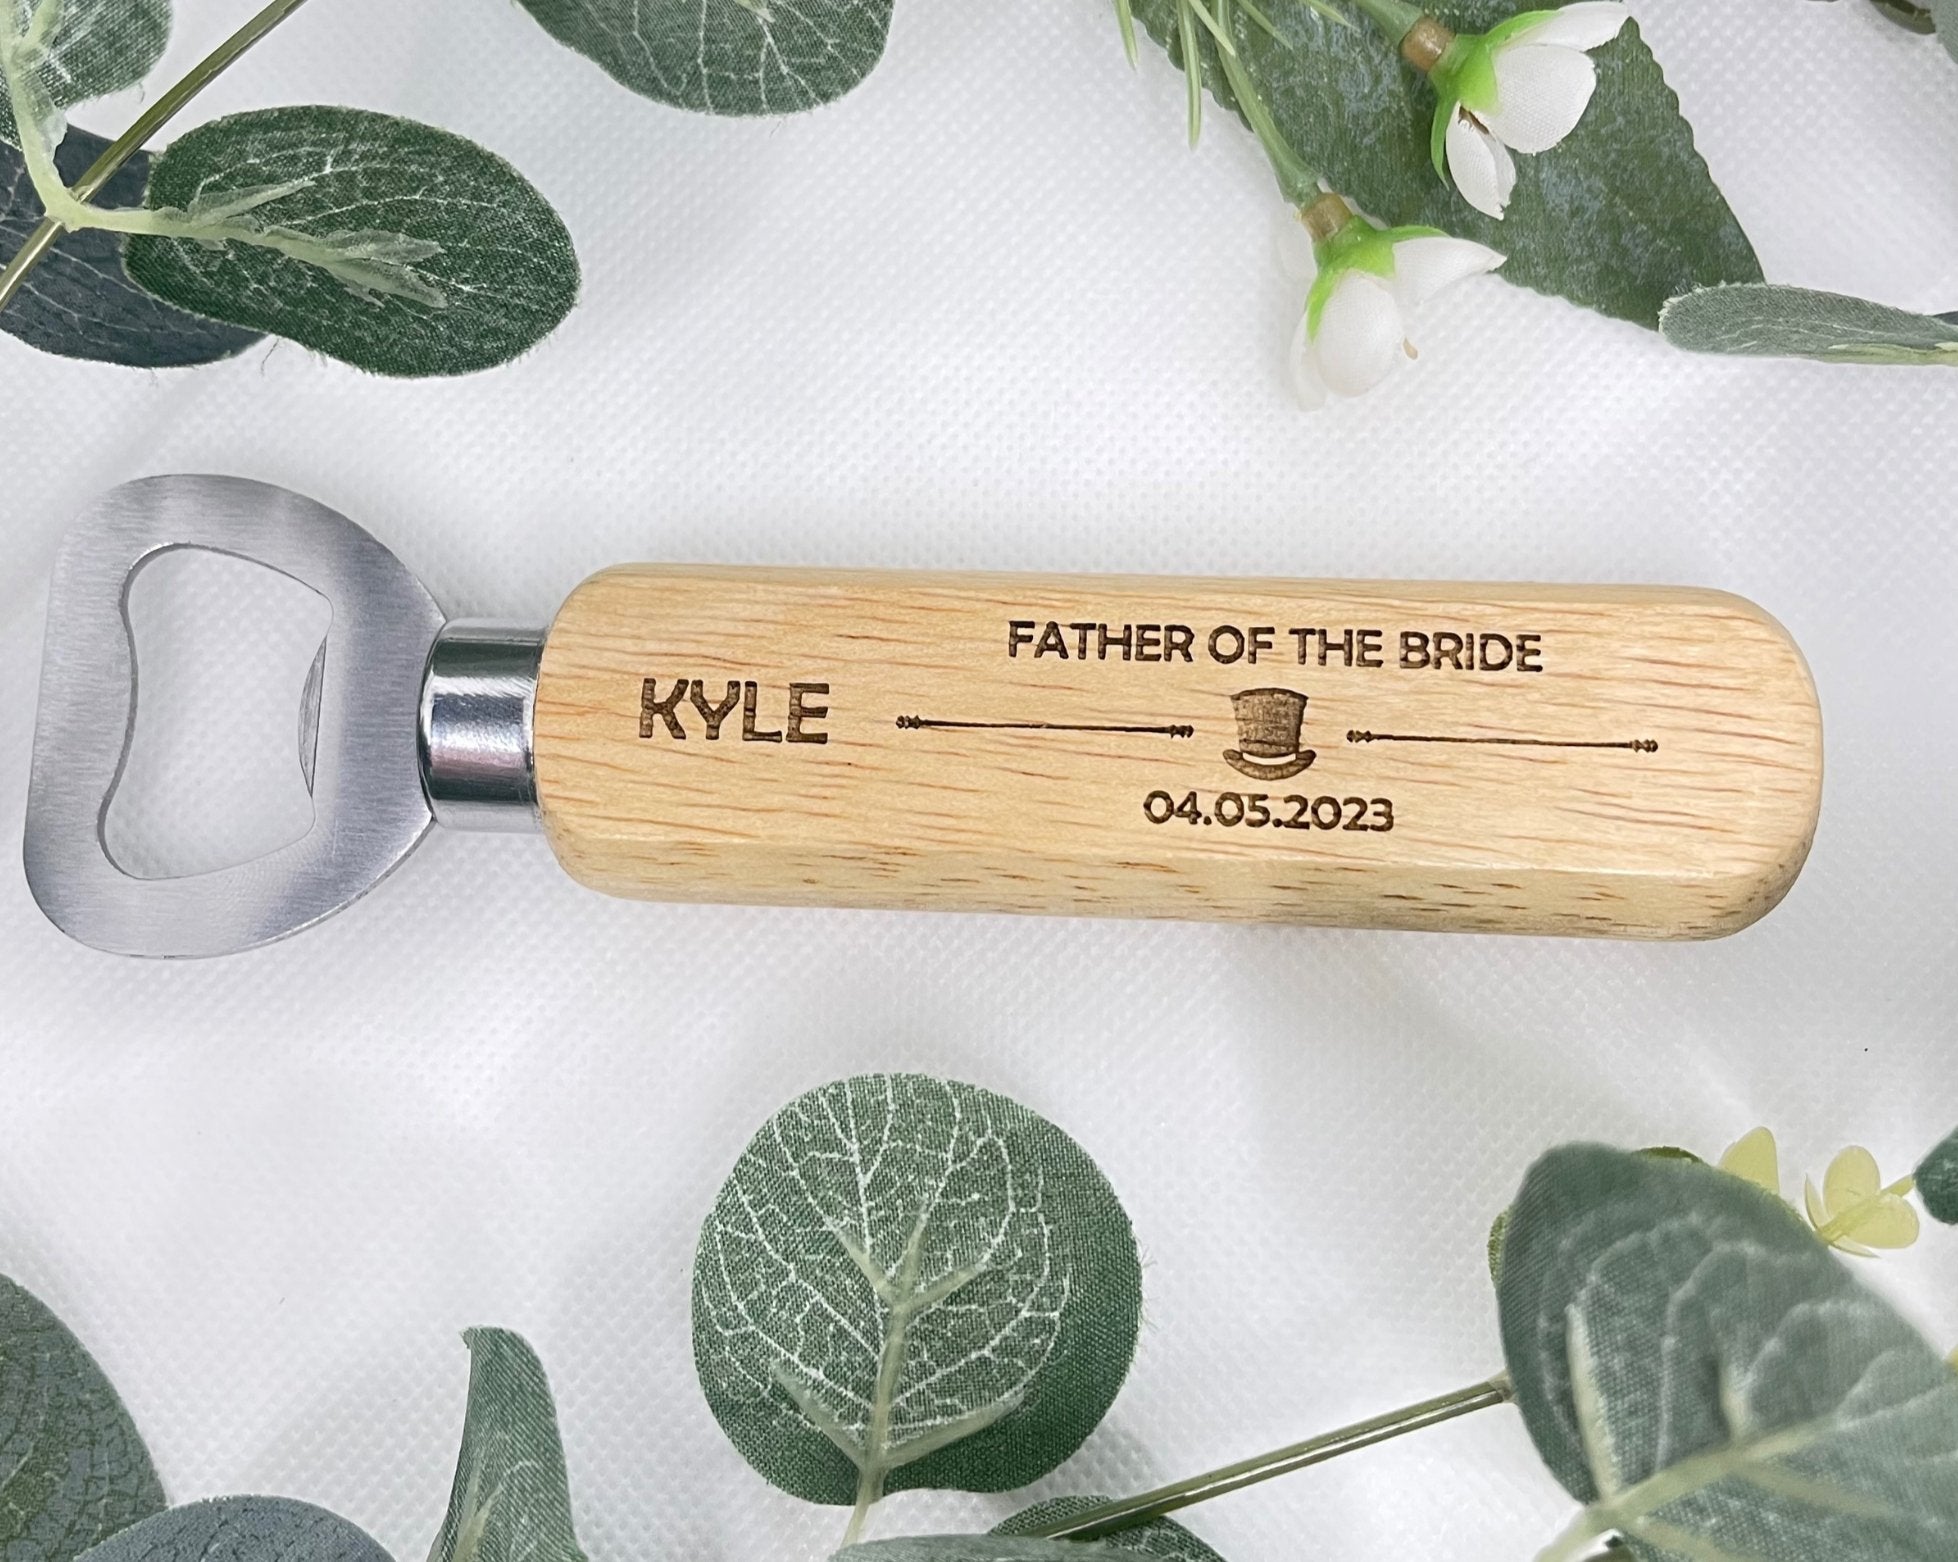 Celebrate your special day with our charming Personalised Wedding Bottle Openers. Handcrafted and laser-engraved with a whimsical hat image, these keepsakes make the perfect wedding or Stag Do gift. With durable stainless steel and natural wood design, each opener is personalised with the recipient's name, role, and wedding date. An ideal memento that combines practicality and sentiment. Remember to hand wash only. Personalisation details needed: name, wedding role, and date.